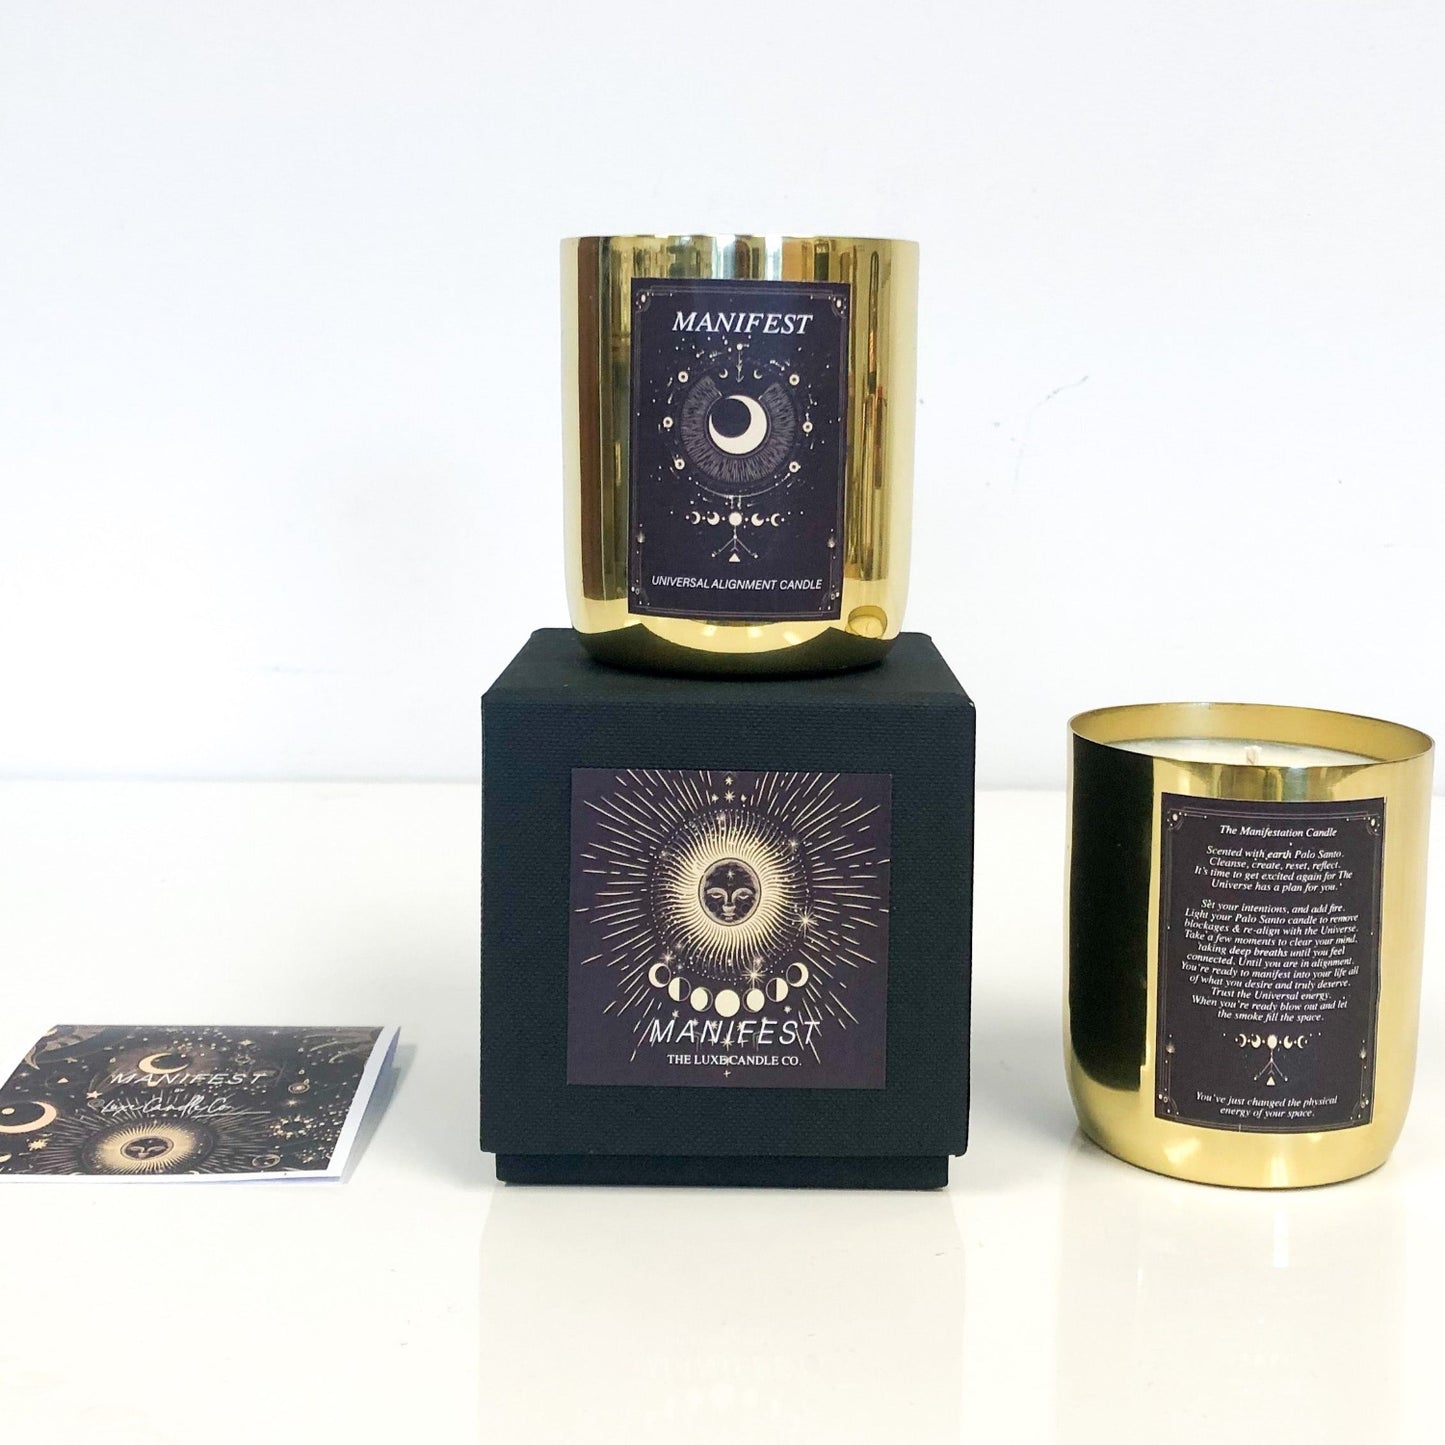 Palo santo fragranced candles for manifesting your dreams. Gold candle in black box makes luxury gift